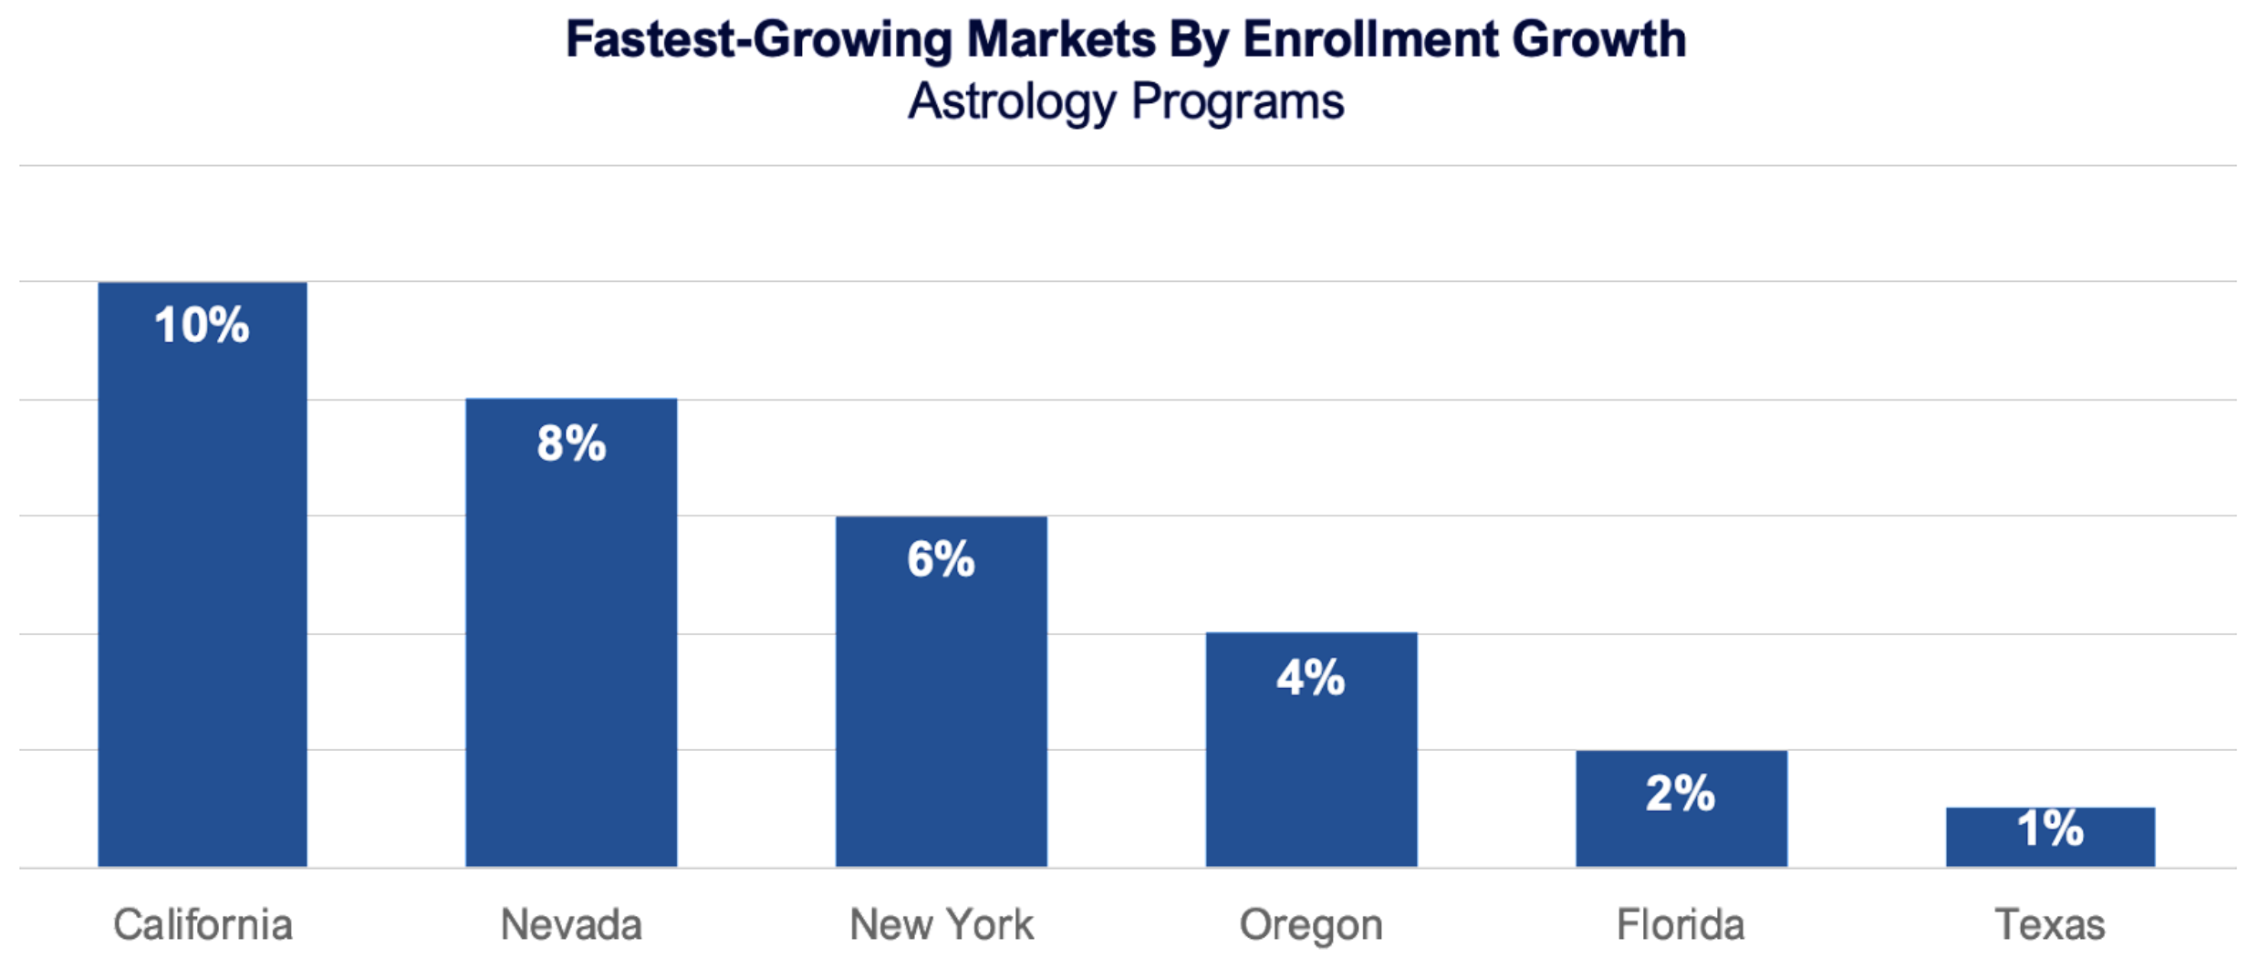 Fastest-growing markets by enrollment growth (Astrology programs) 